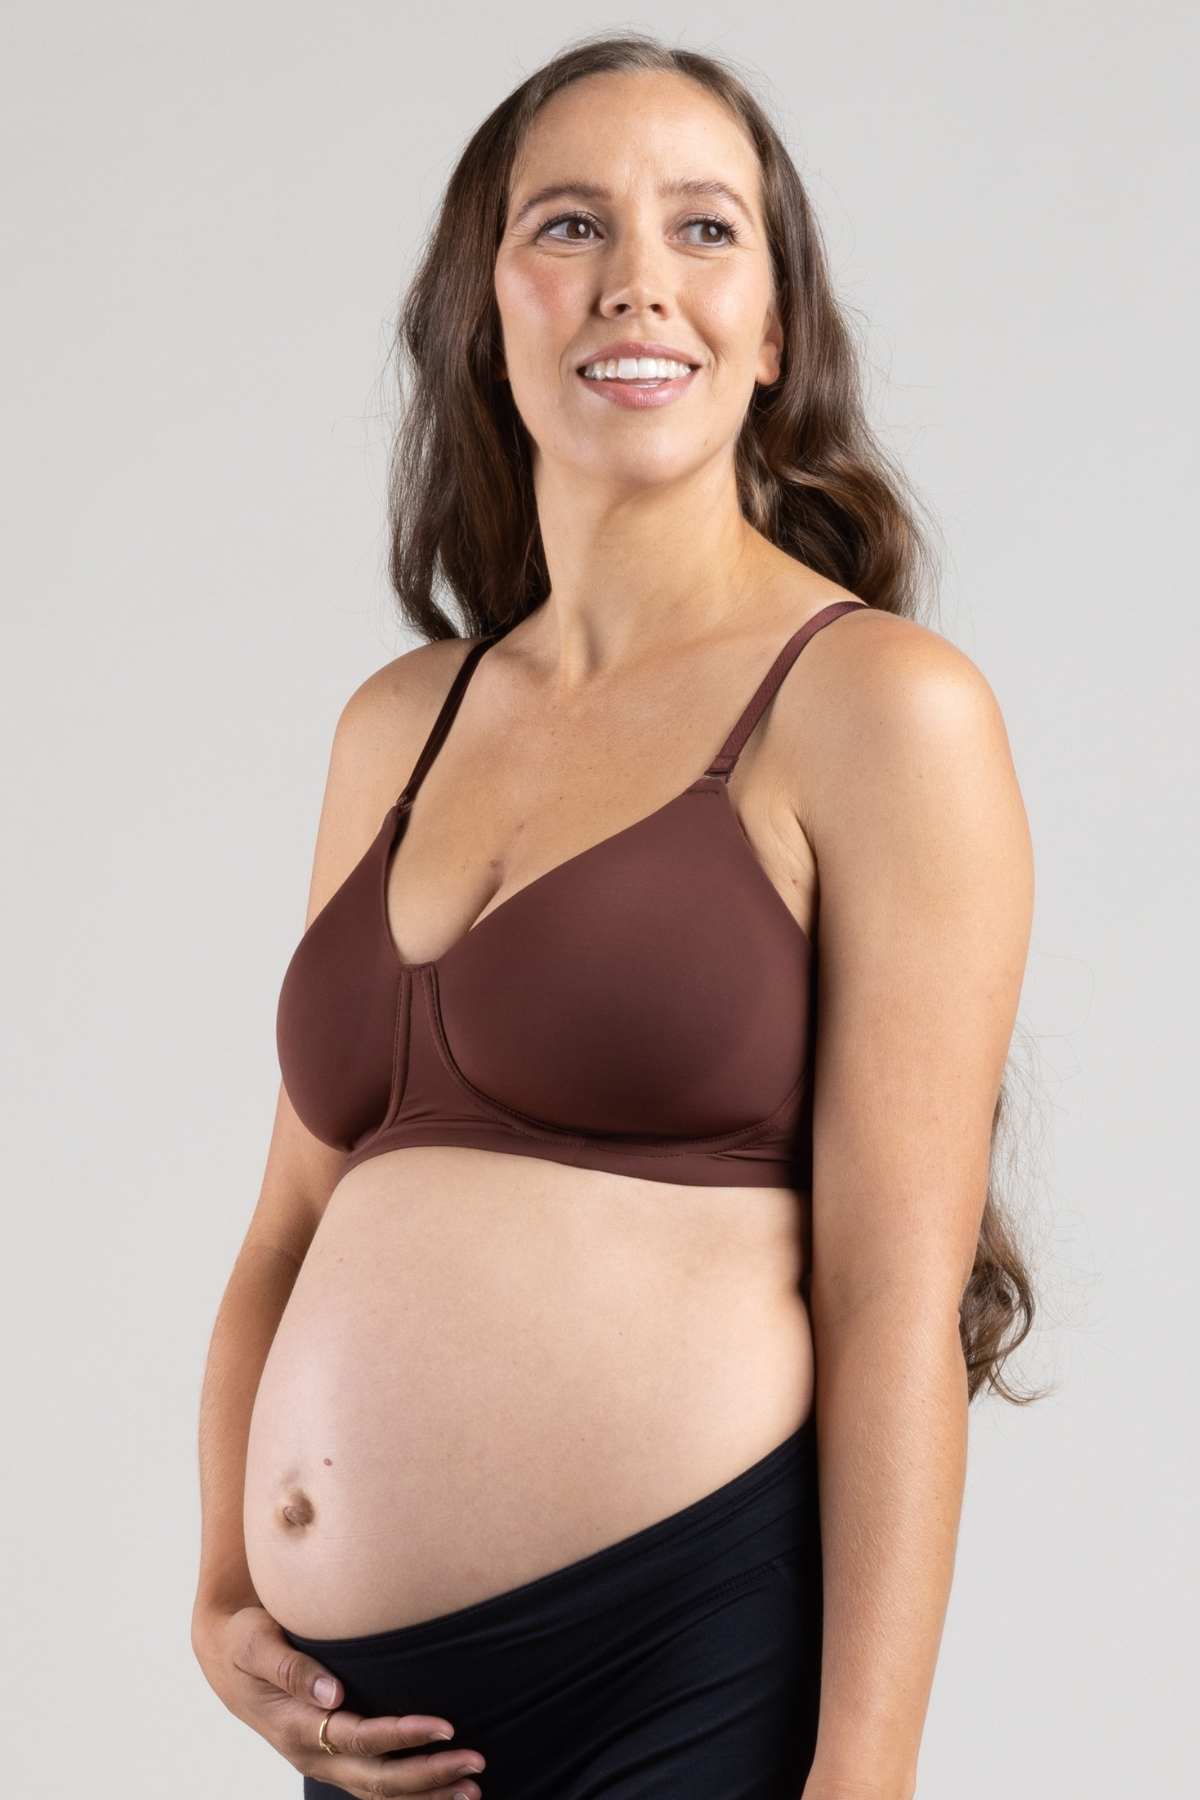 Undercover Nursing T-Shirt Bra worn on a pregnant woman in color bitter chocolate with the nursing clasp hidden for repurposed wear during pregnancy